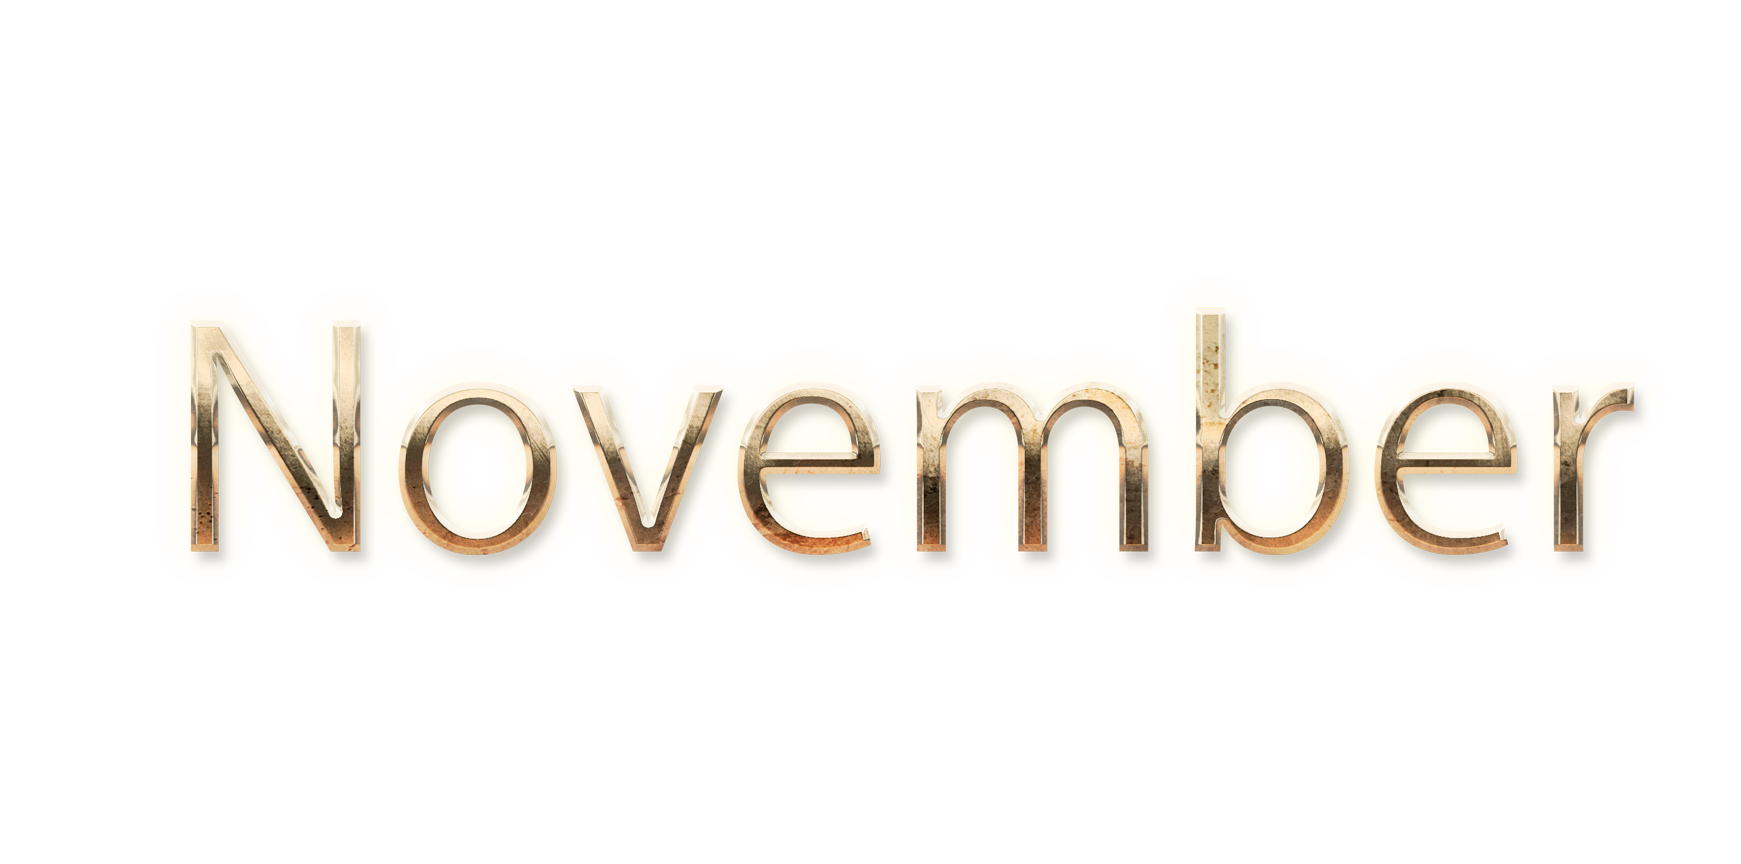 NOVEMBER month name word NOVEMBER gold text typography PNG images free